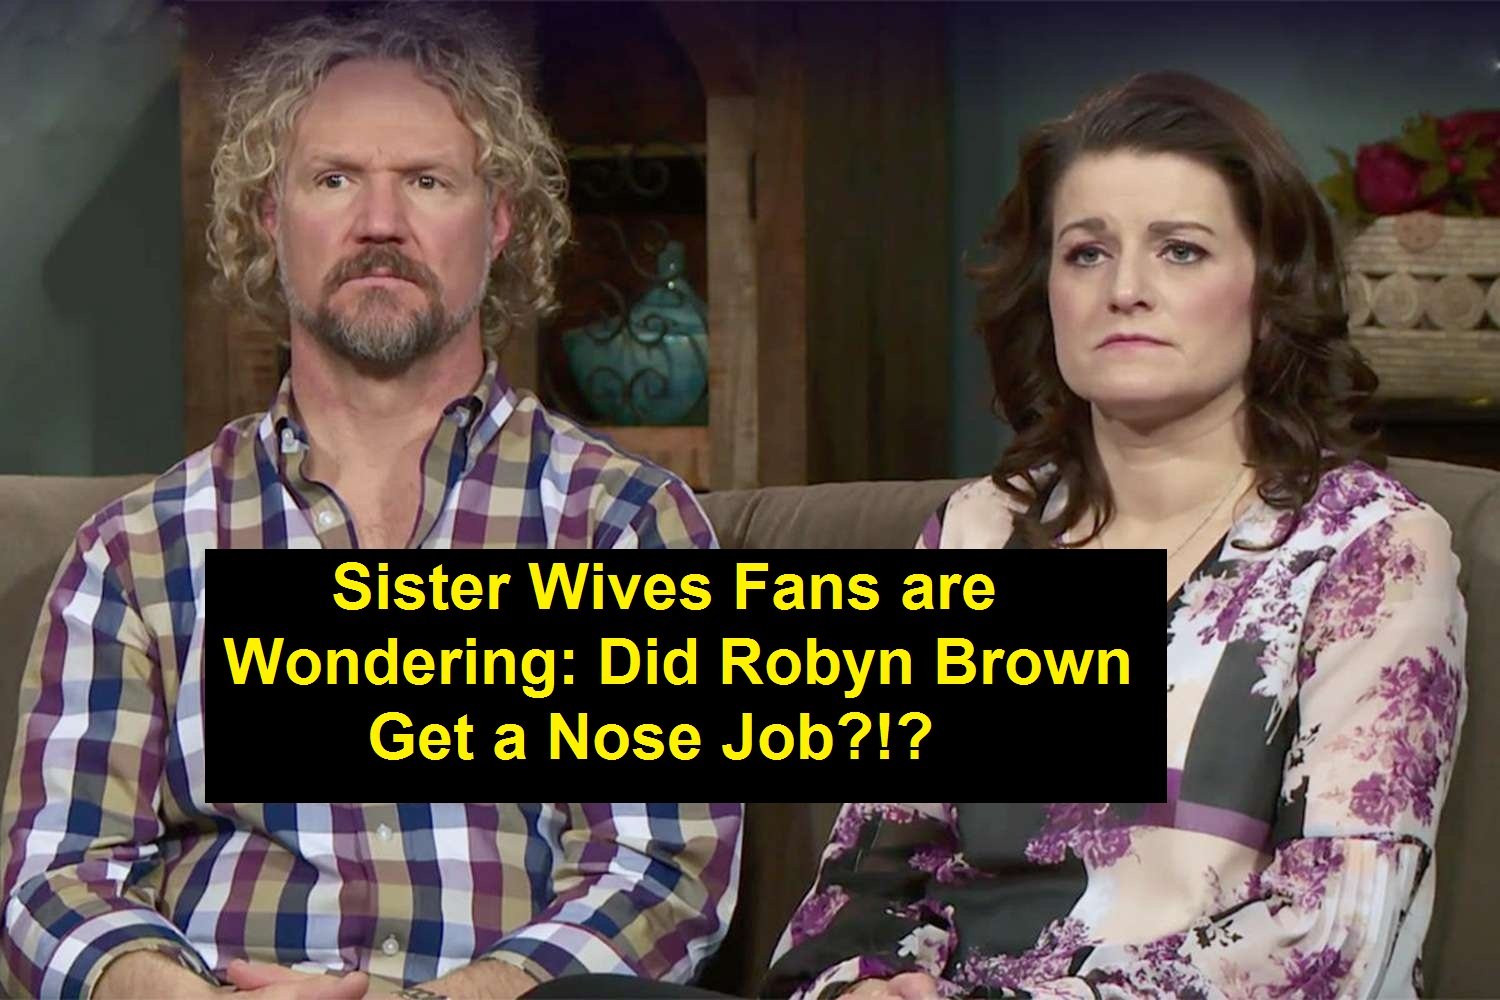 Sister Wives Fans are Wondering: Did Robyn Brown Get a Nose Job?!?